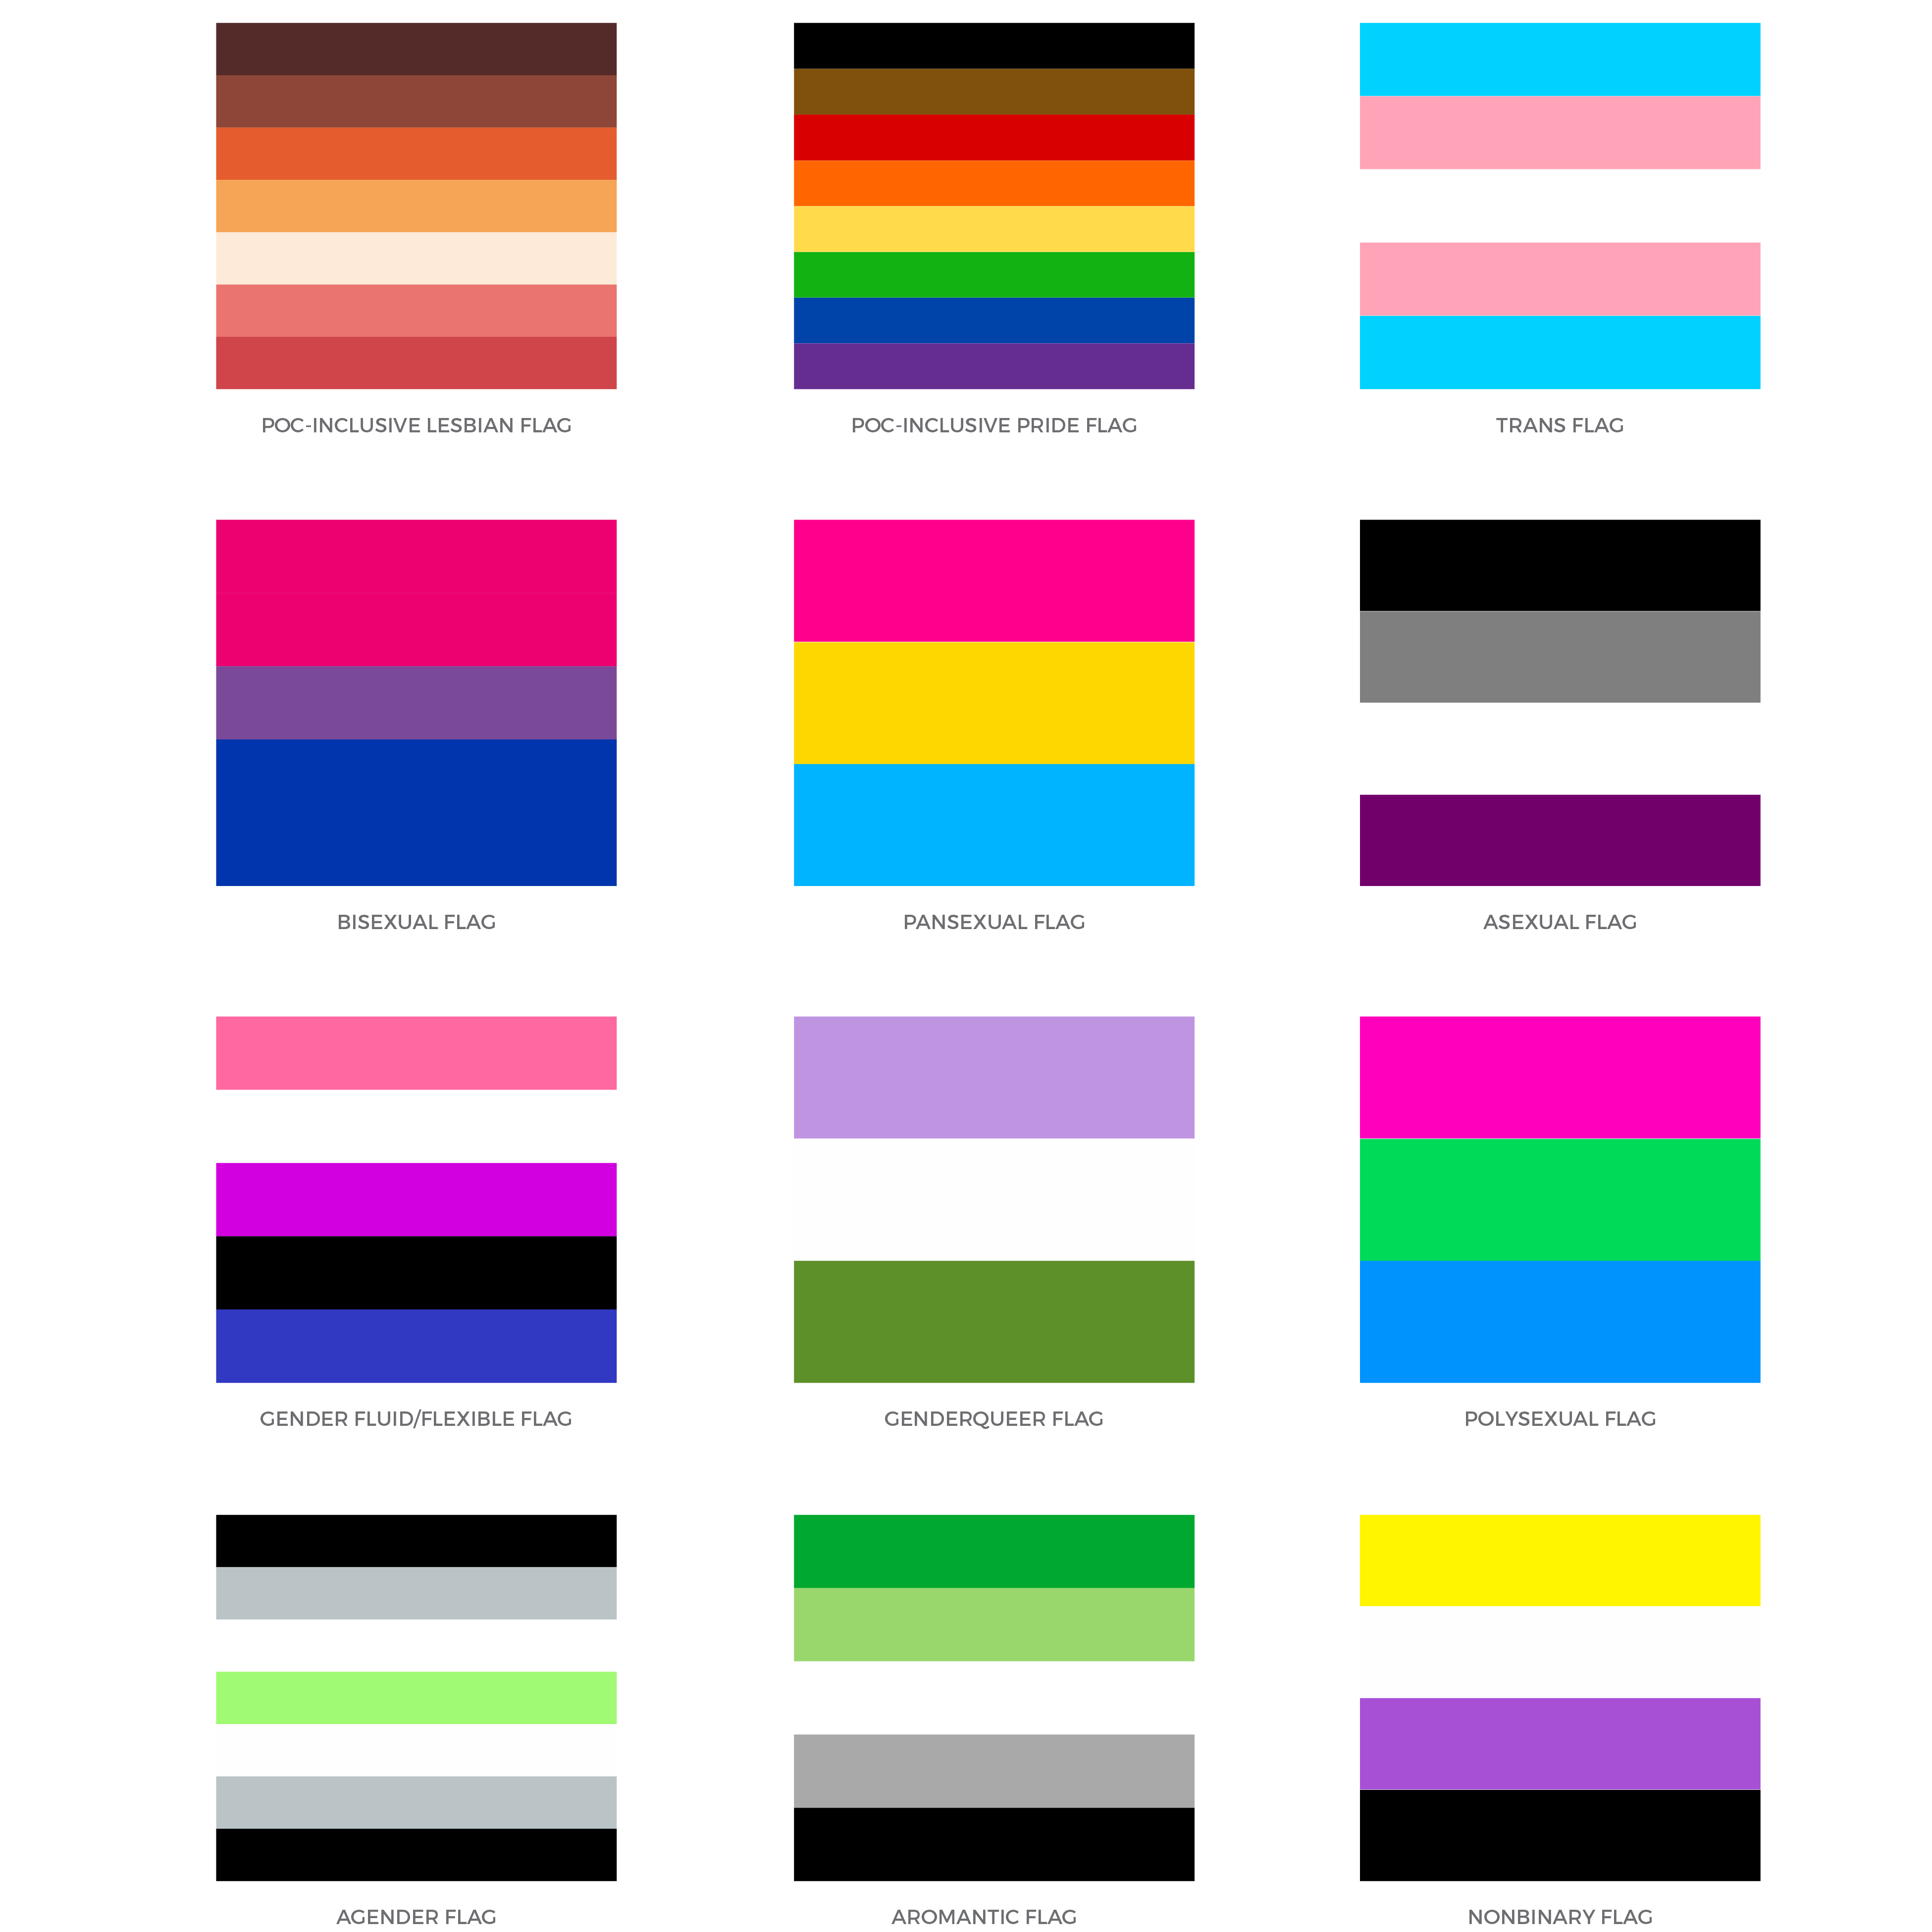 charlottesville gay pride flags and meanings